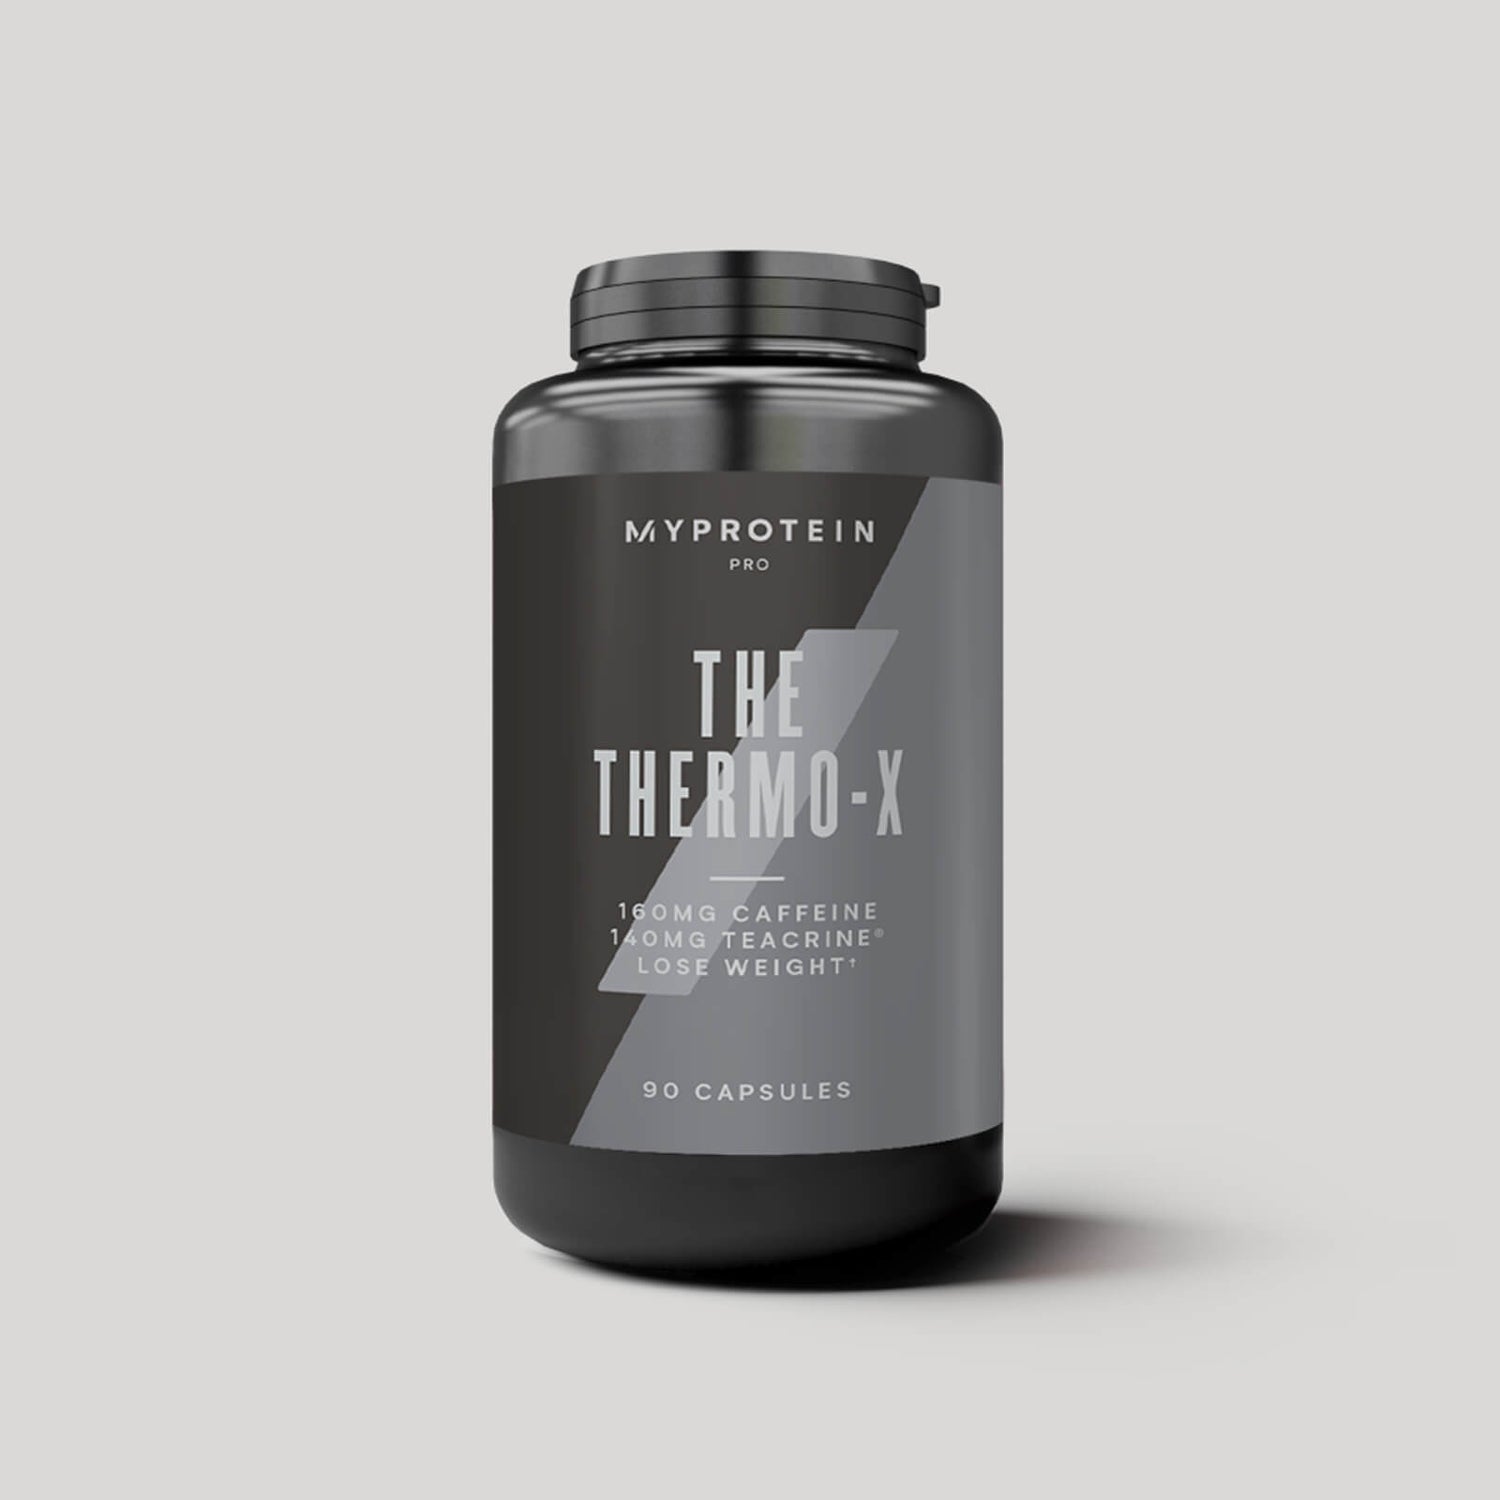 „THE Thermo-X™“